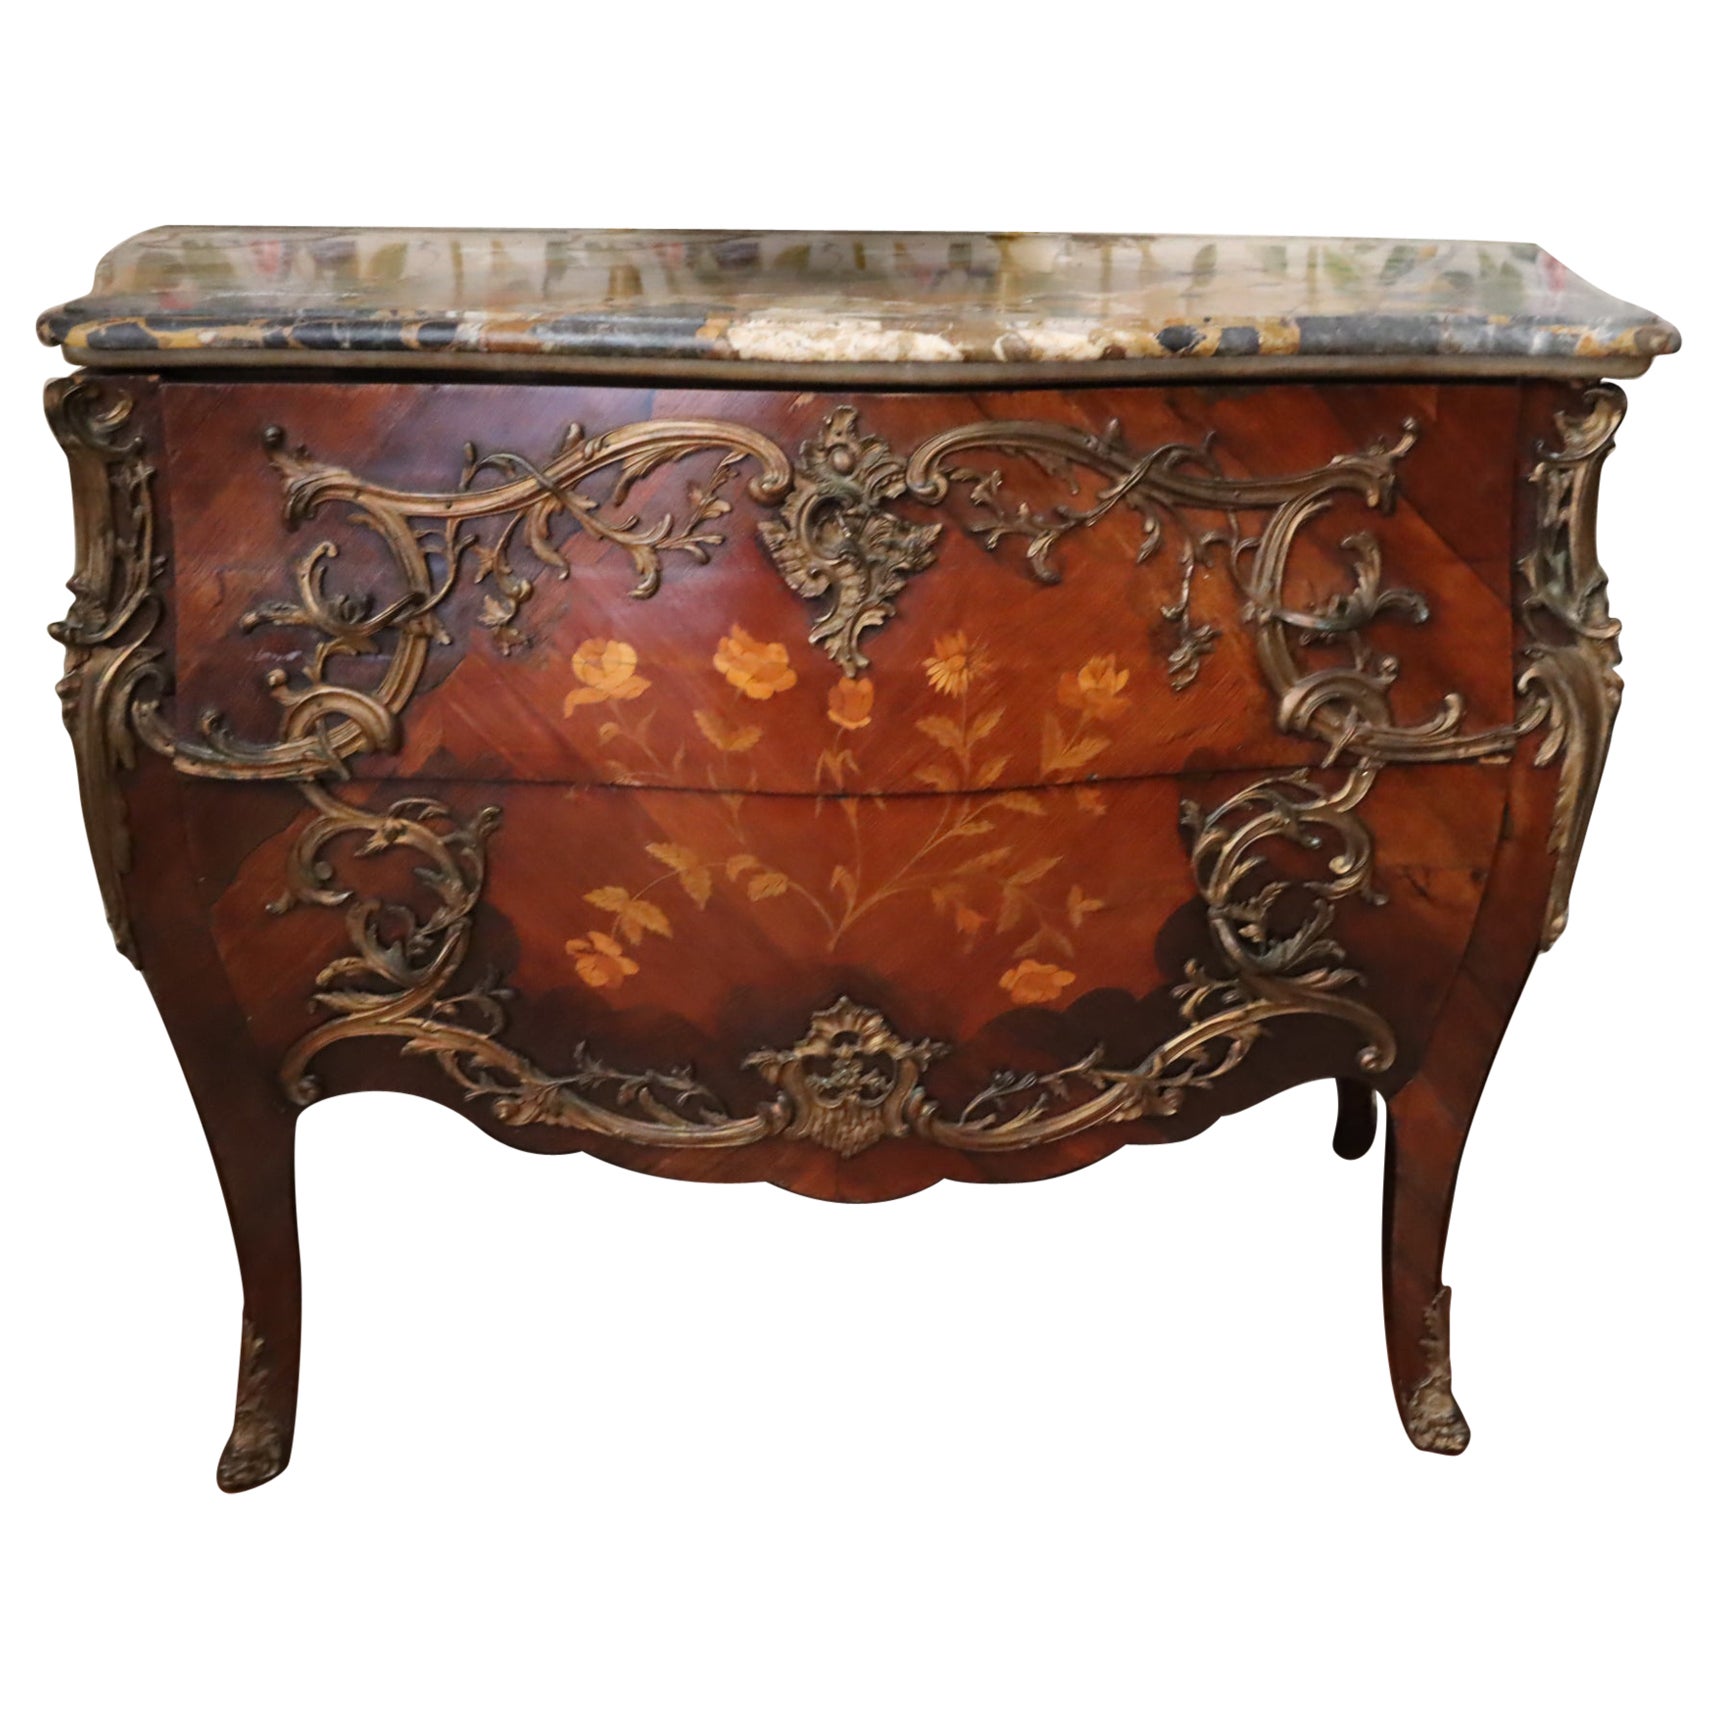 Early 19th Century marquetry and Parquetry French Commode, with Ormalu Mounts. For Sale